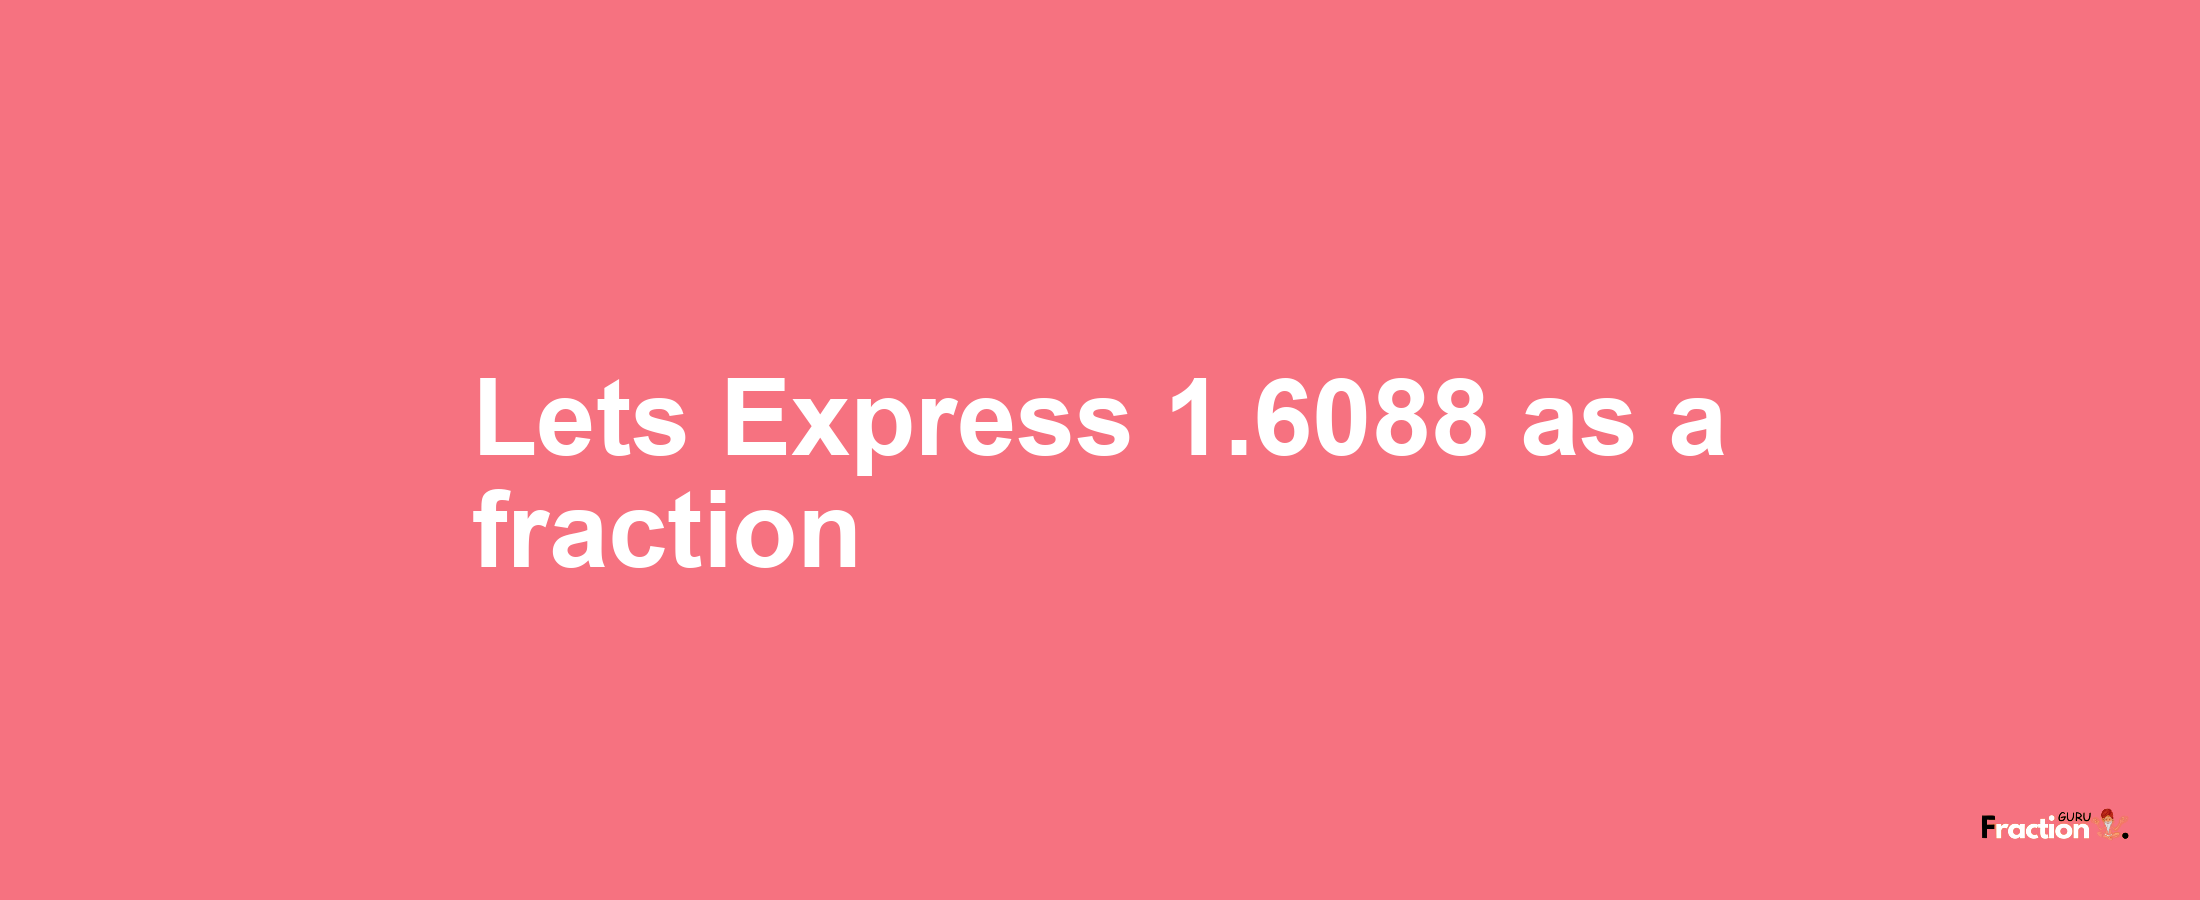 Lets Express 1.6088 as afraction